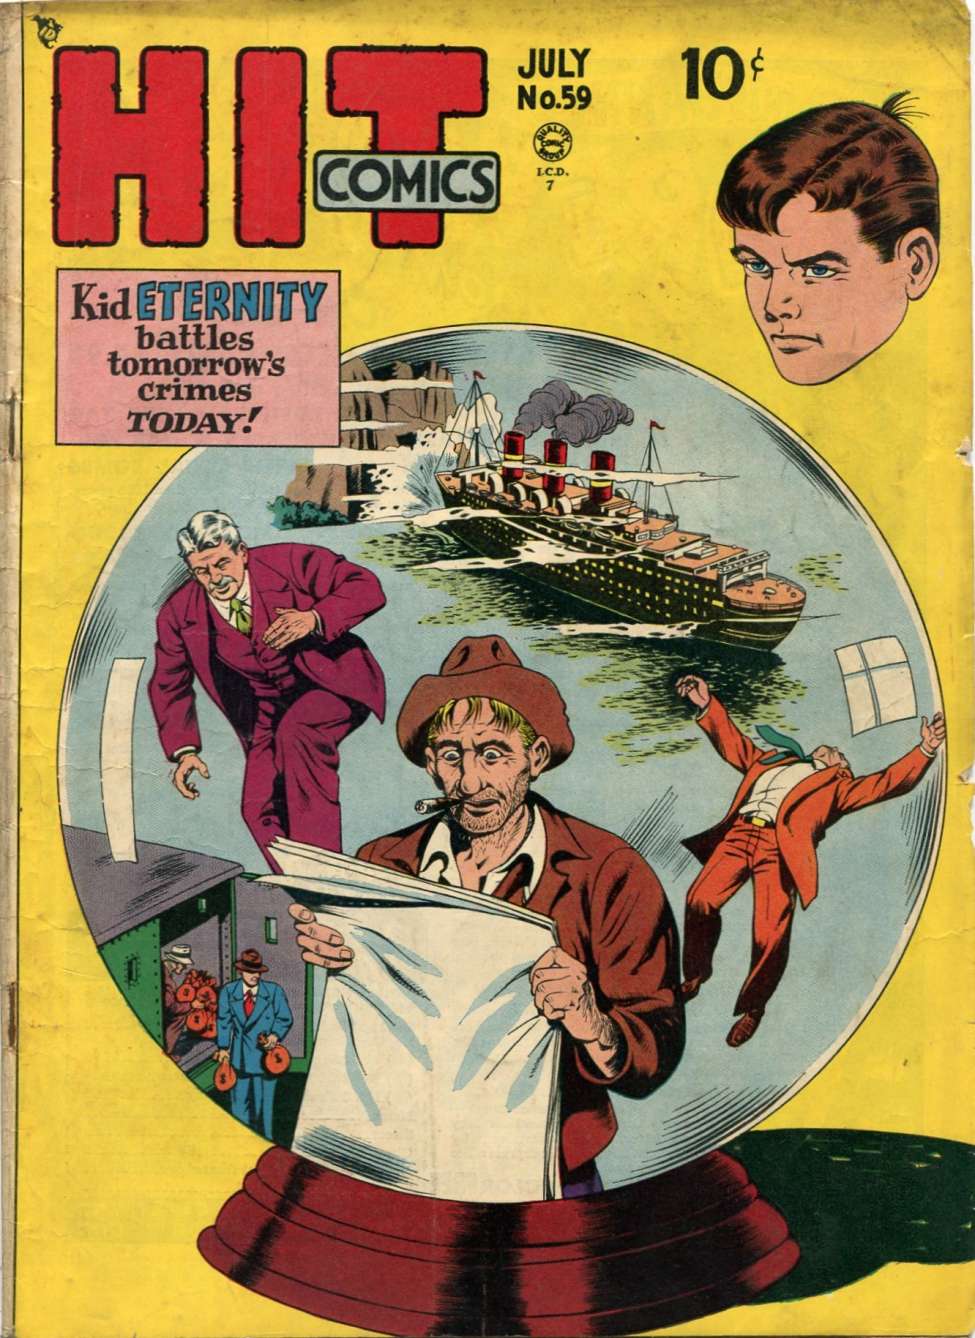 Comic Book Cover For Hit Comics 59